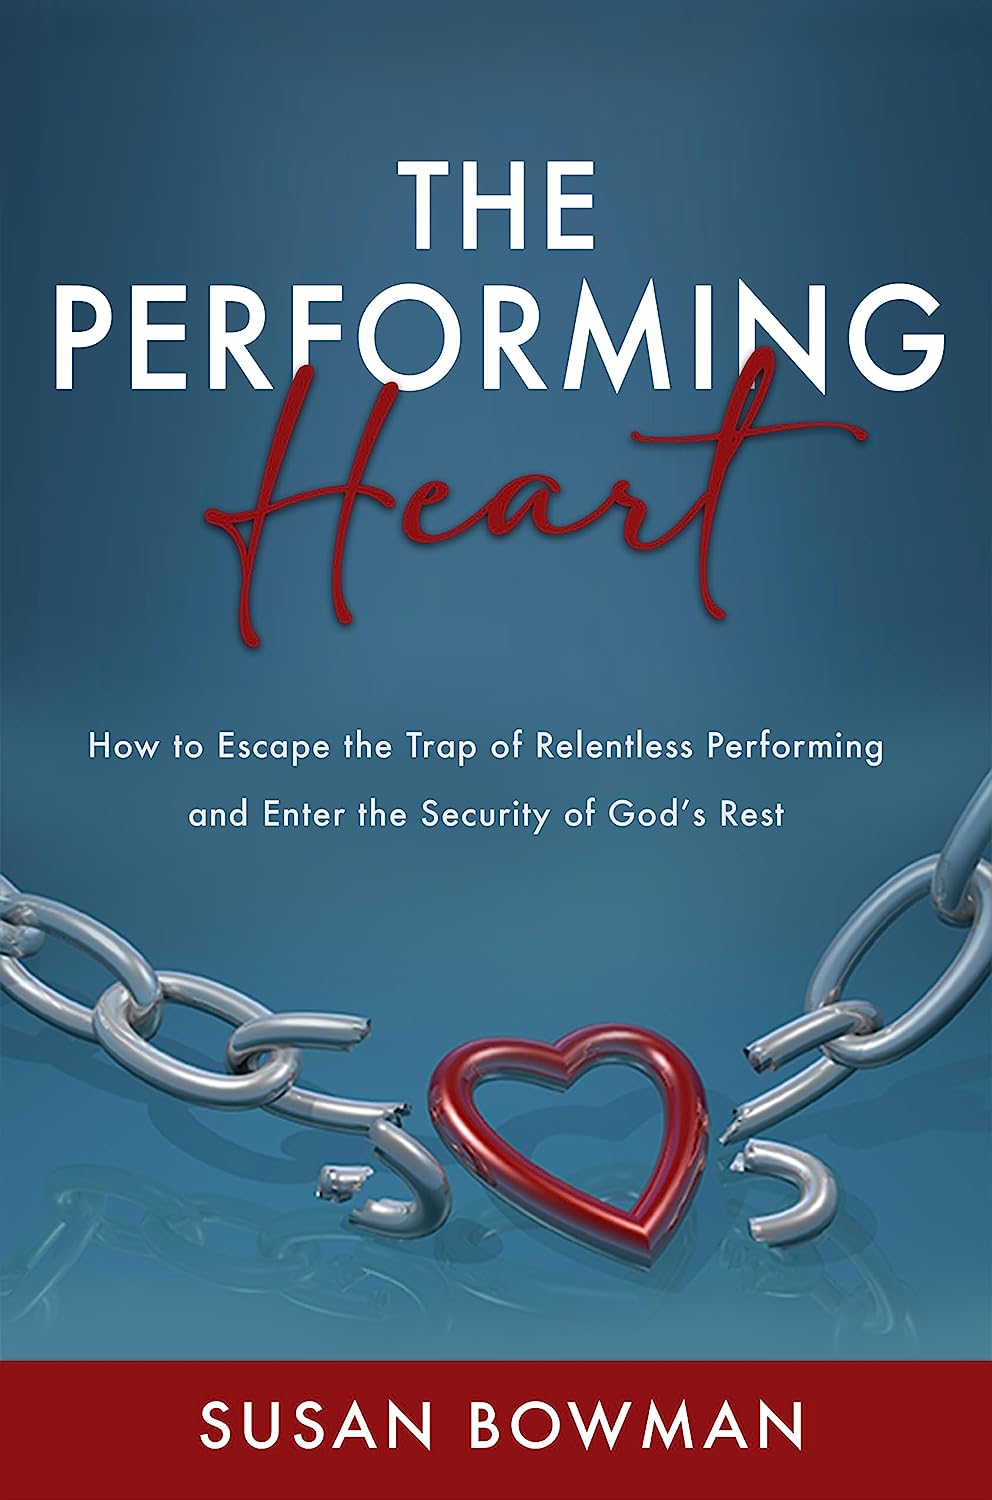 New book The Performing Heart interweaves spiritual truths and science to offer a unique heart-based approach to healing anxiety.